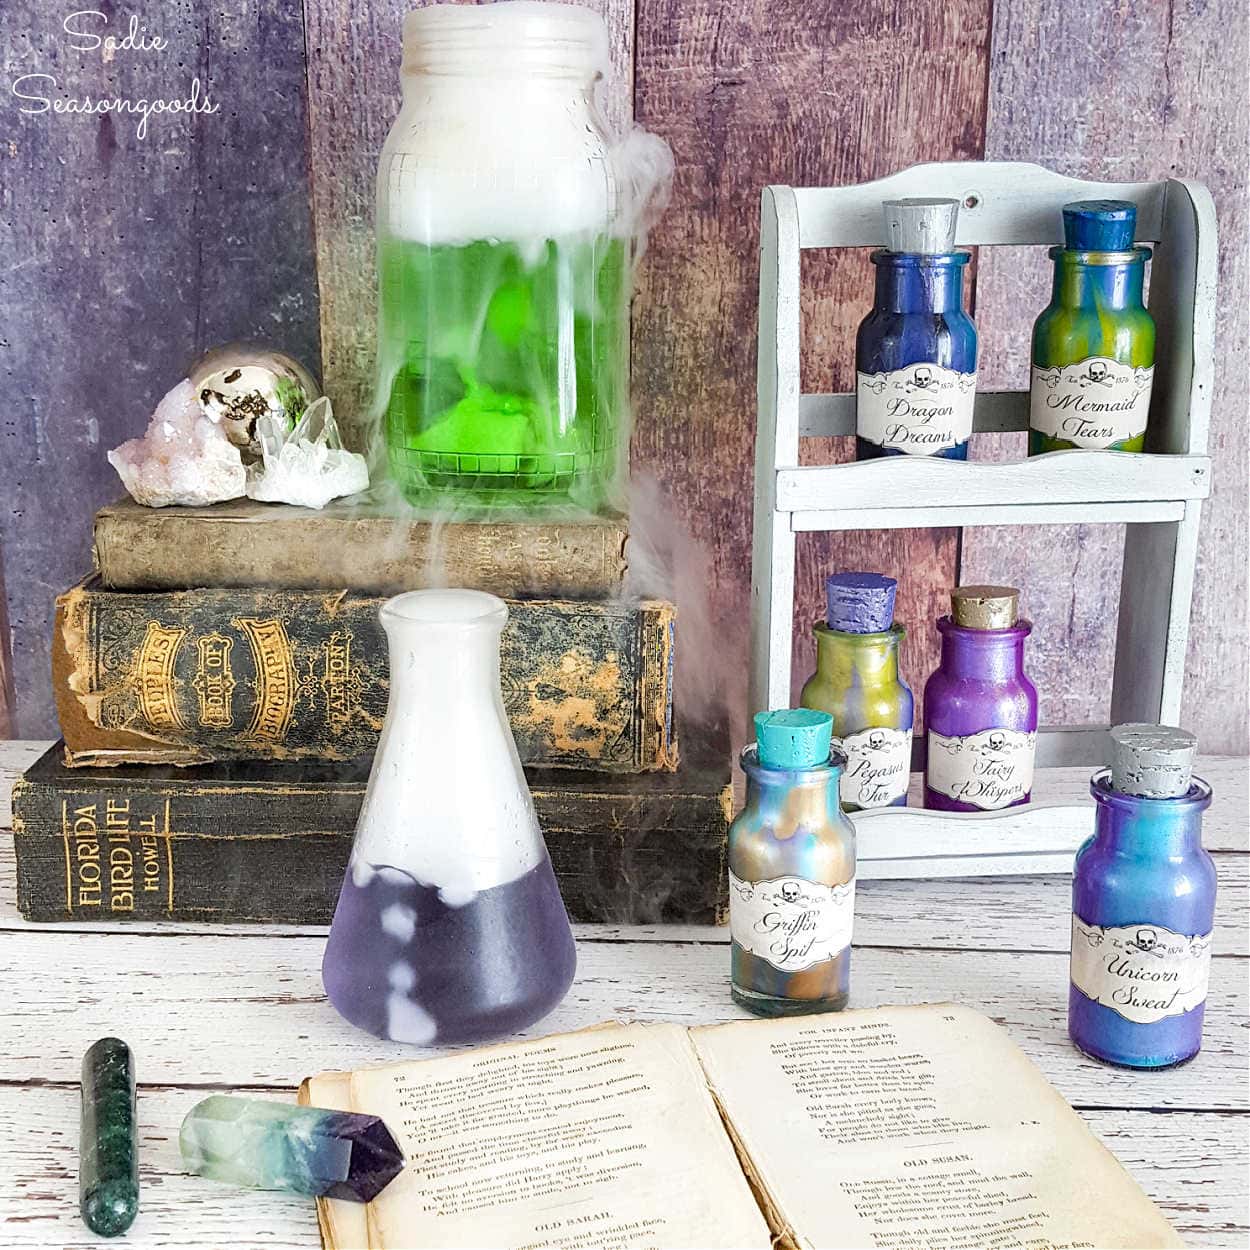 How to Make Magic Potions (An Easy Art Project for Kids)